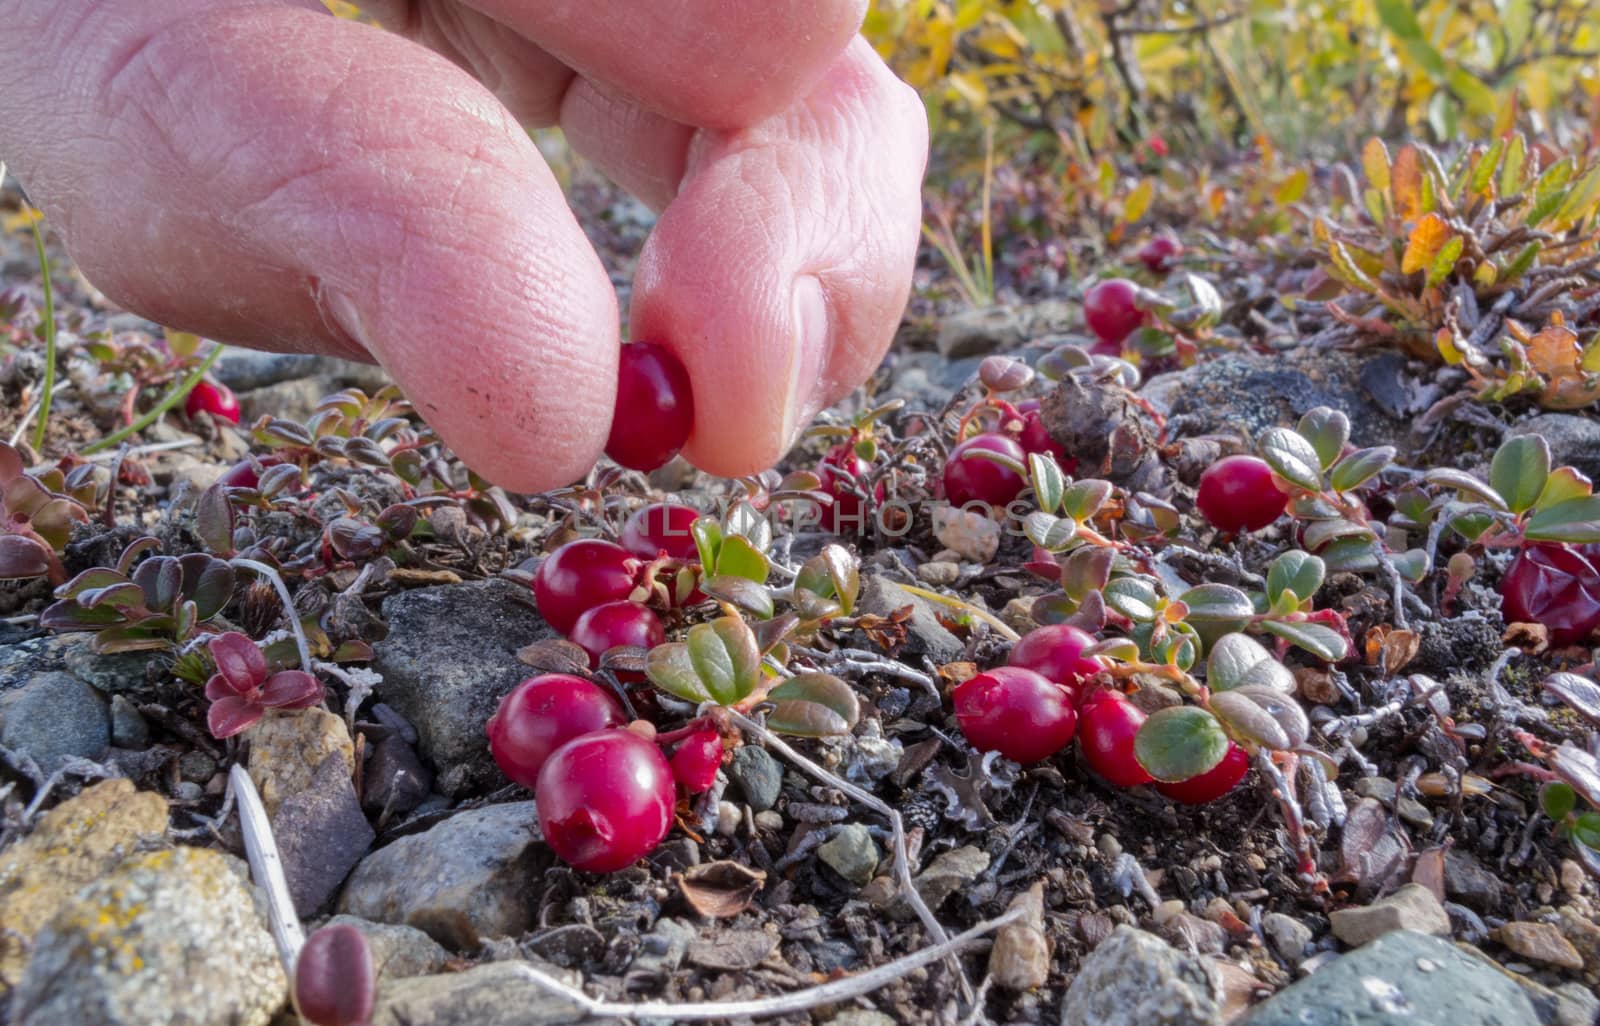 Harvest of ripe red low-bush cranberries, lingonberry, or partridgeberry, Vaccinium vitis-idaea, with bare fingers in alpine tundra